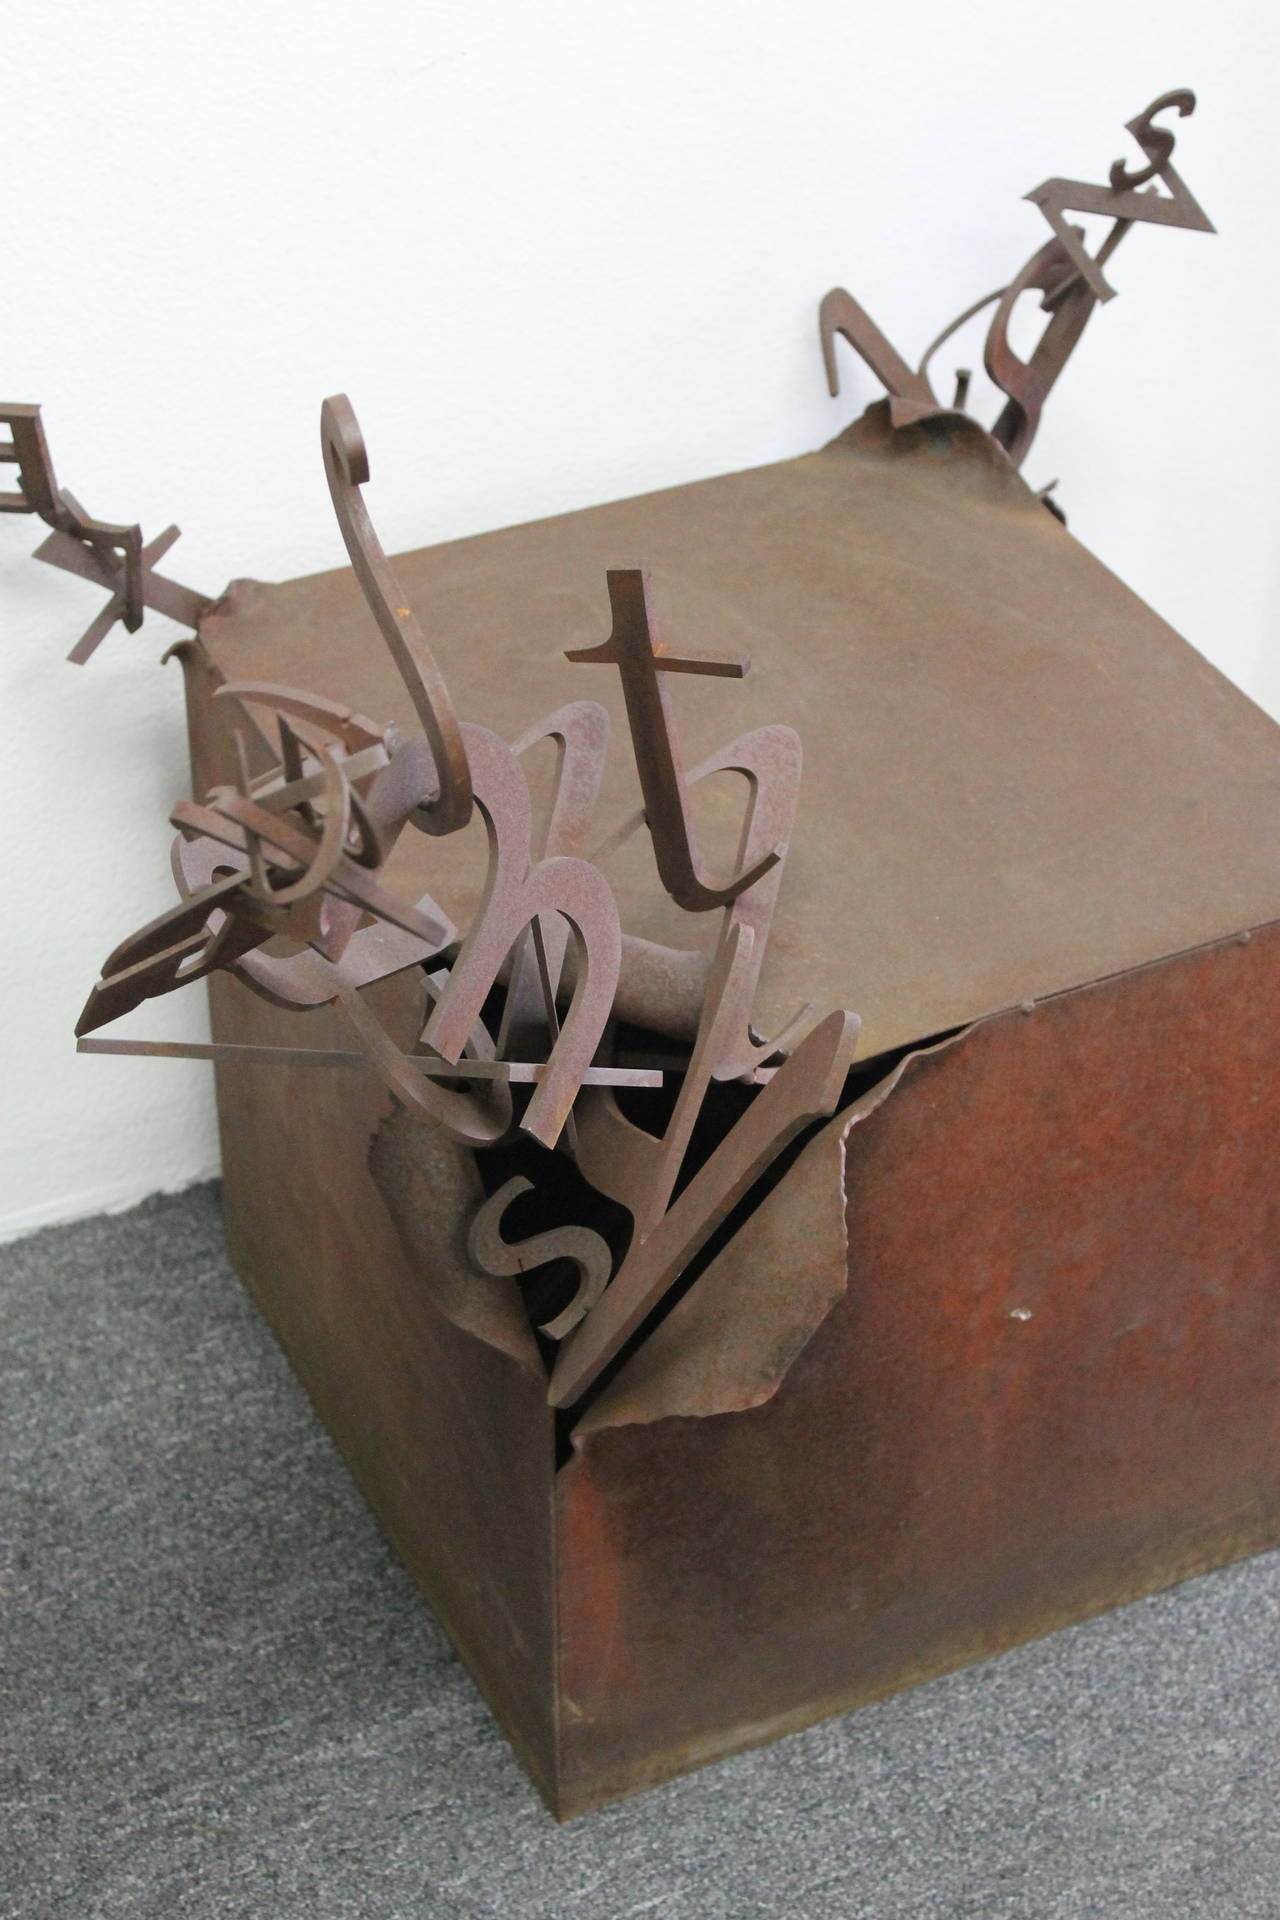 Steel box pedestal / sculpture with letters protruding out of 3 corners.  We call this the letter box and it was most likely used as a store prop.  Can be used as an indoor or outdoor sculpture.  The box without the letters is 17.5” wide, 17.5”deep